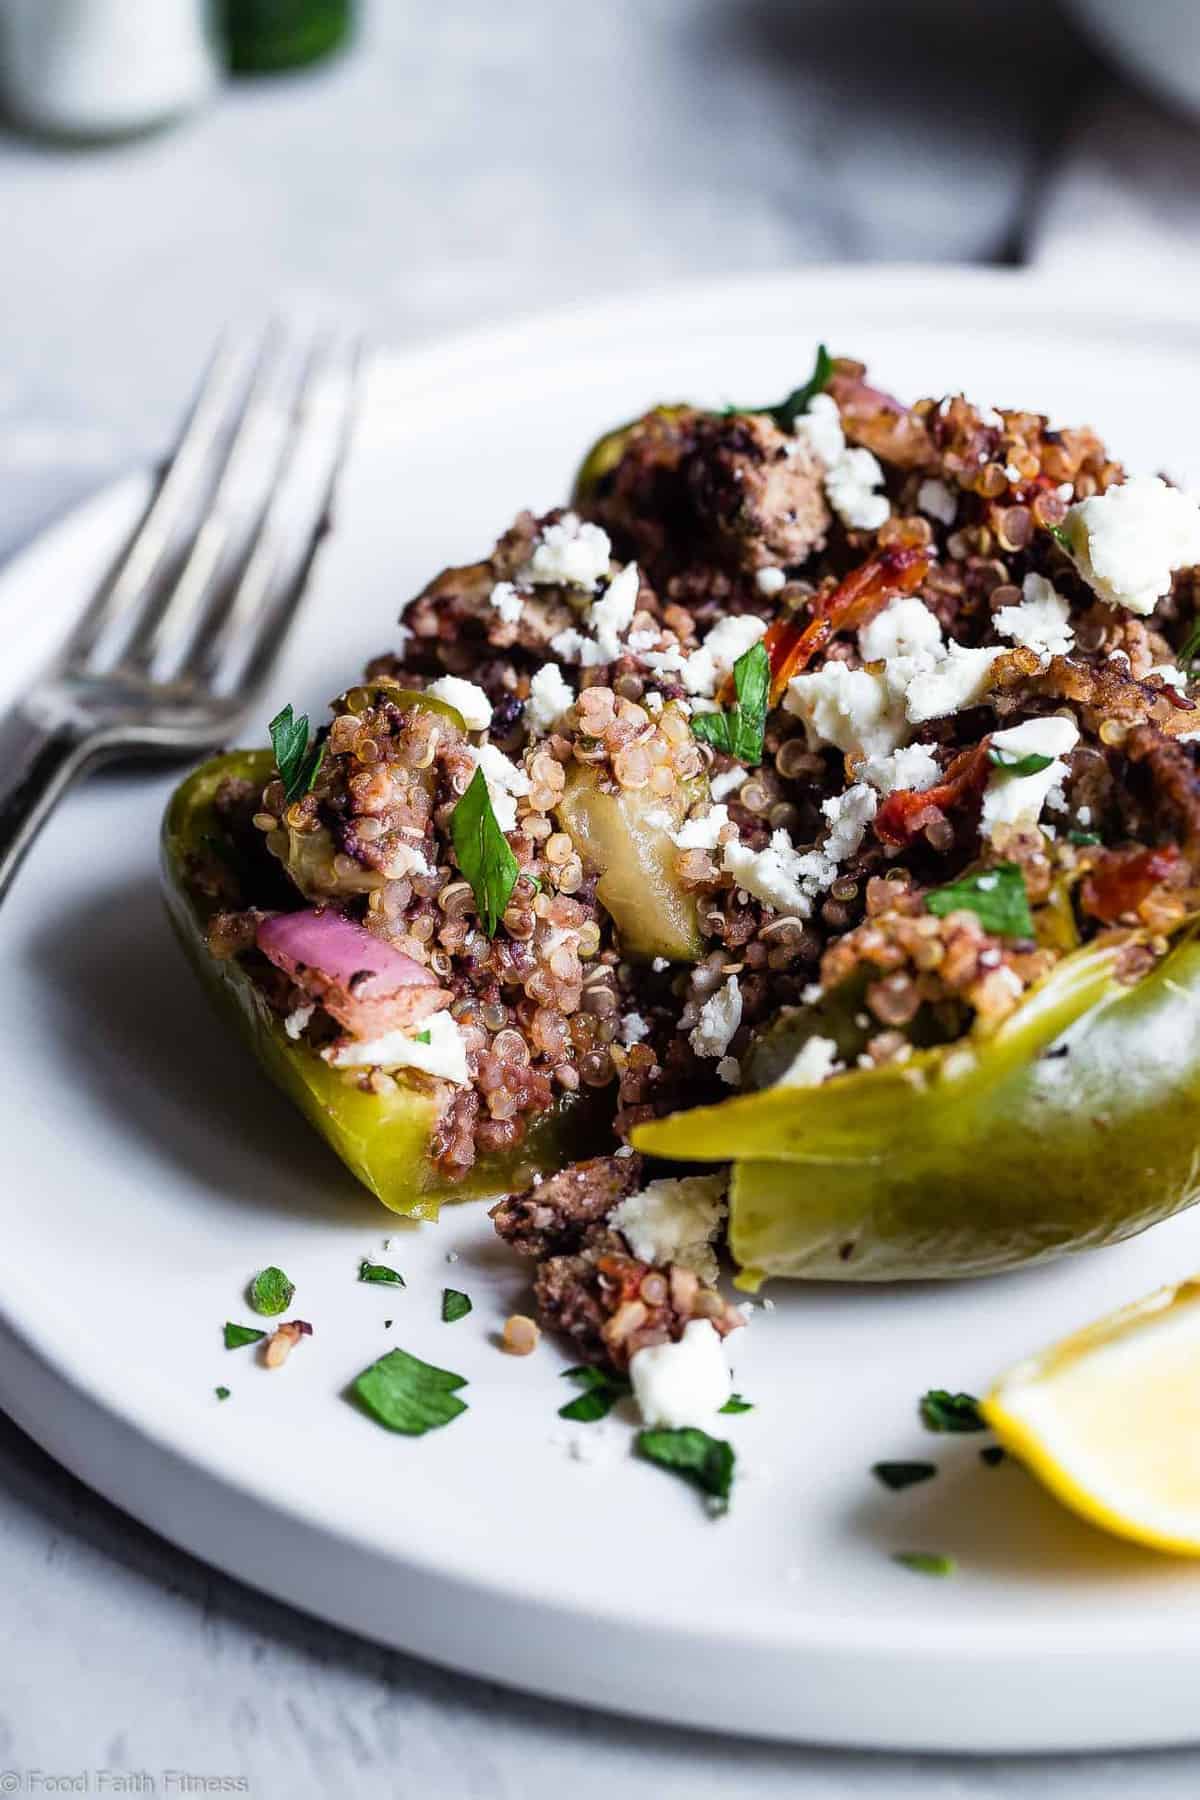 Greek Healthy Turkey Quinoa Stuffed Bell Peppers - These Turkey Quinoa Stuffed Bell Peppers are an easy, crowd-pleasing, weeknight dinner packed with Greek flavors! Healthy, gluten free, dairy free and SO delicious! | #Foodfaithfitness | #Glutenfree #Healthy #Quinoa #Dairyfree #Dinner